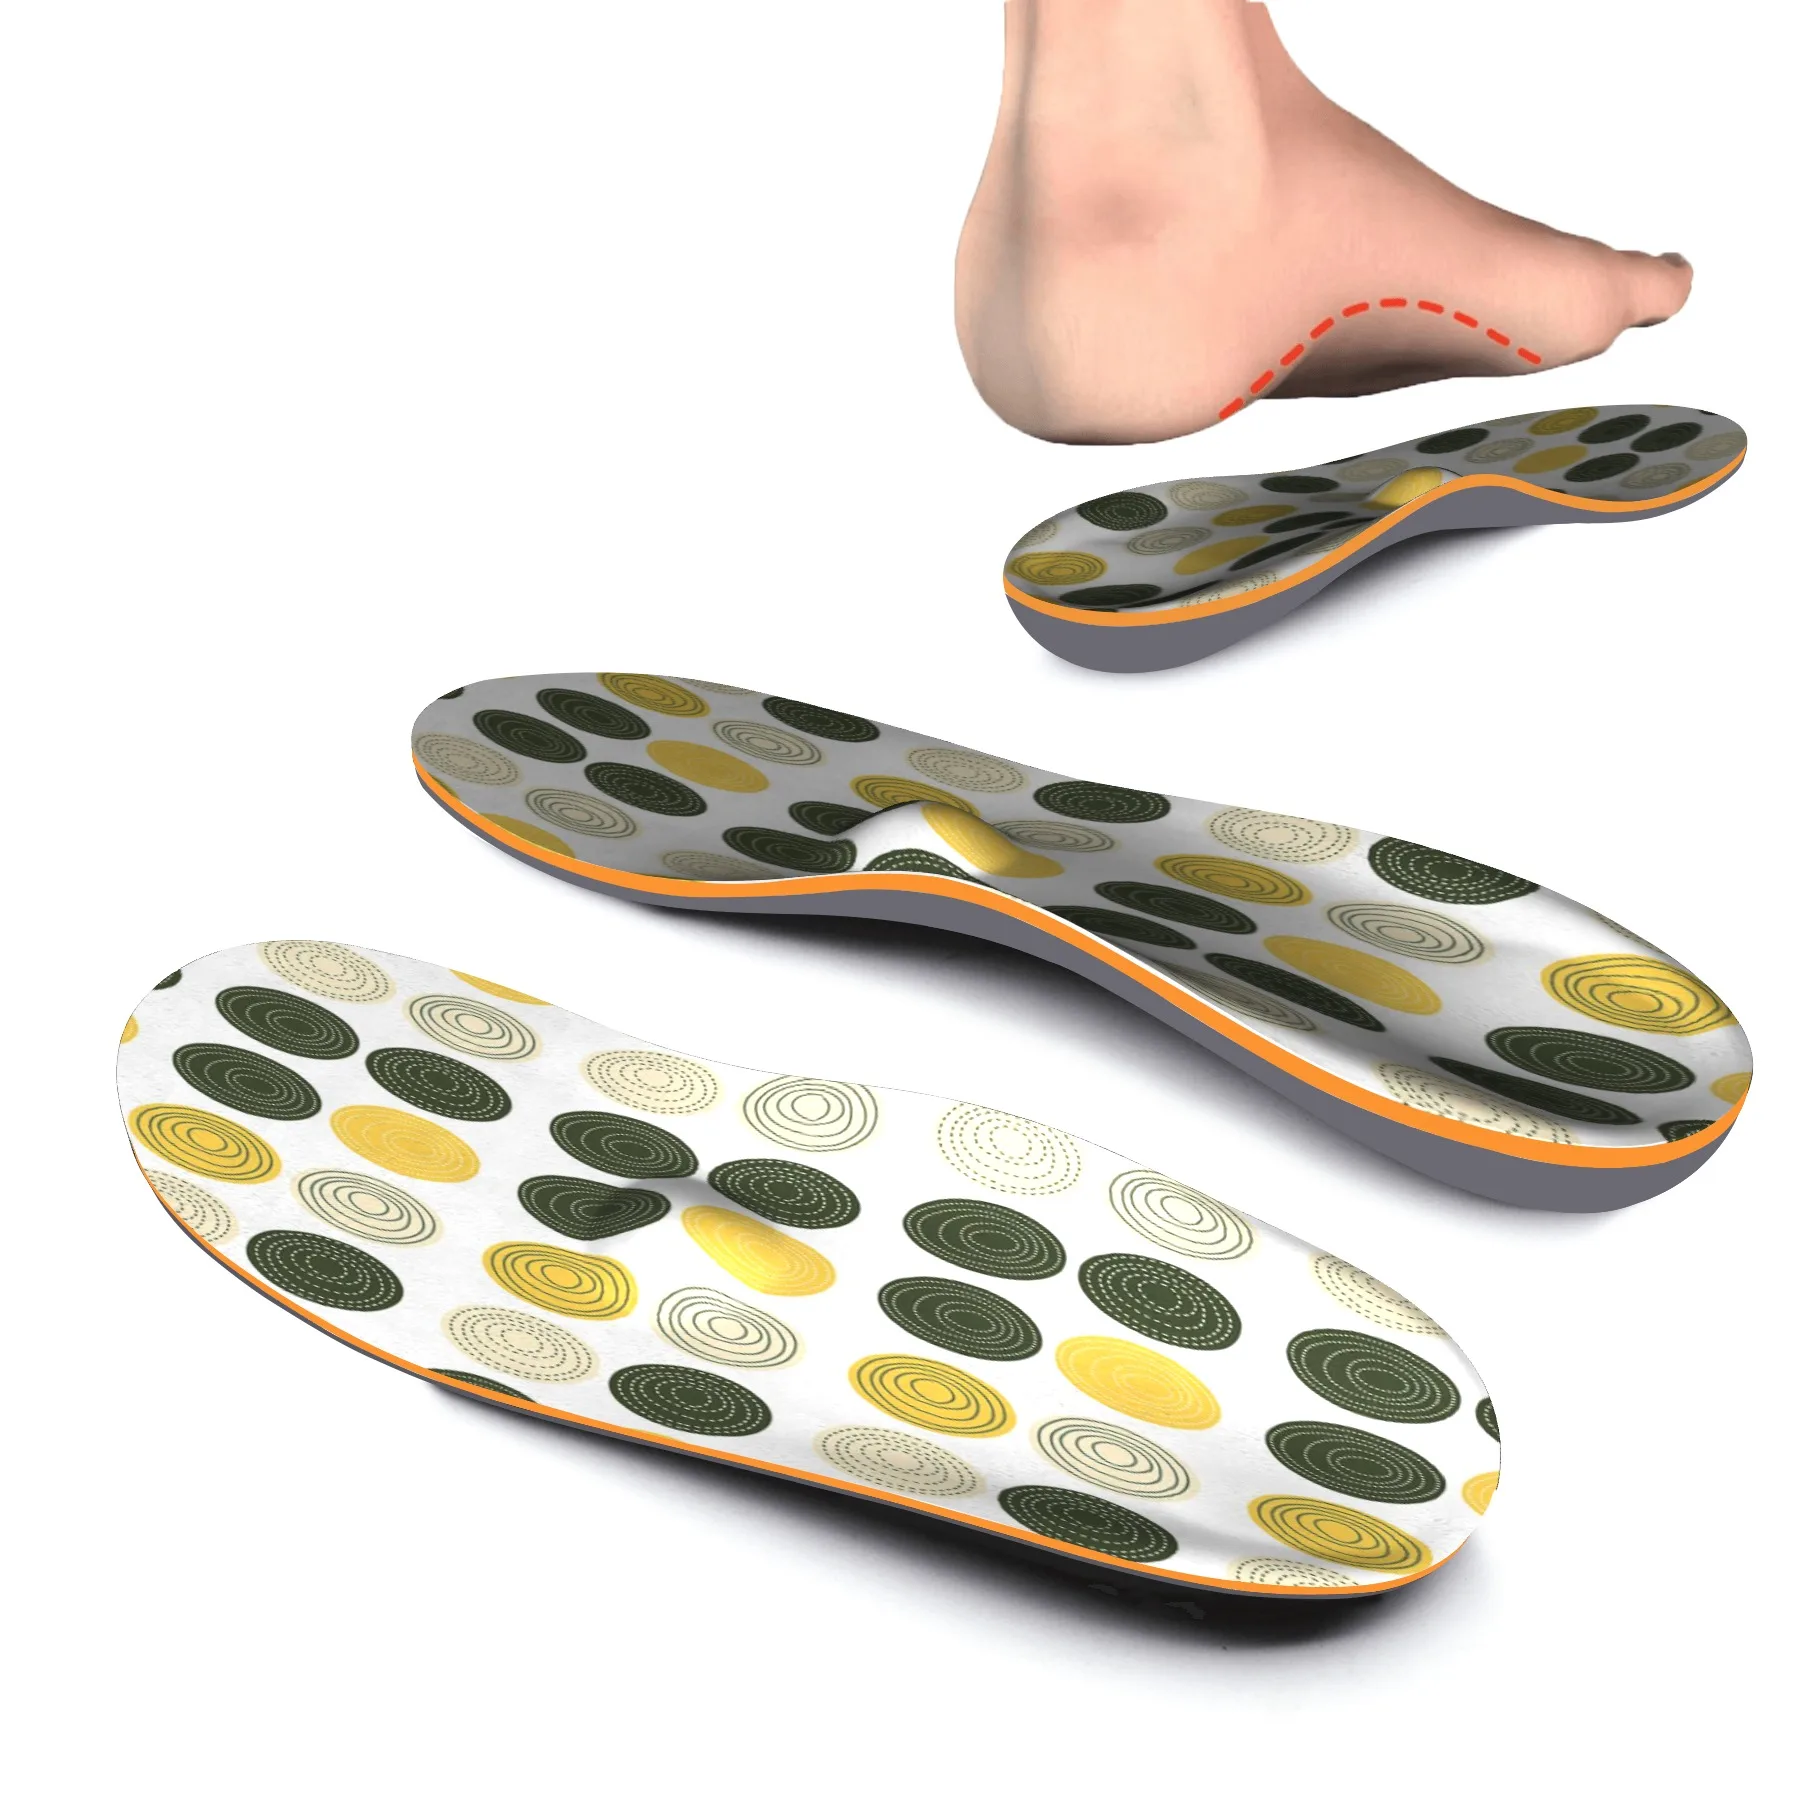 Sport Full Length Orthotic Inserts with Arch Support-Best Insoles for Flat Feet,Heel Spurs&Sore Foot Relieve Heel Pain